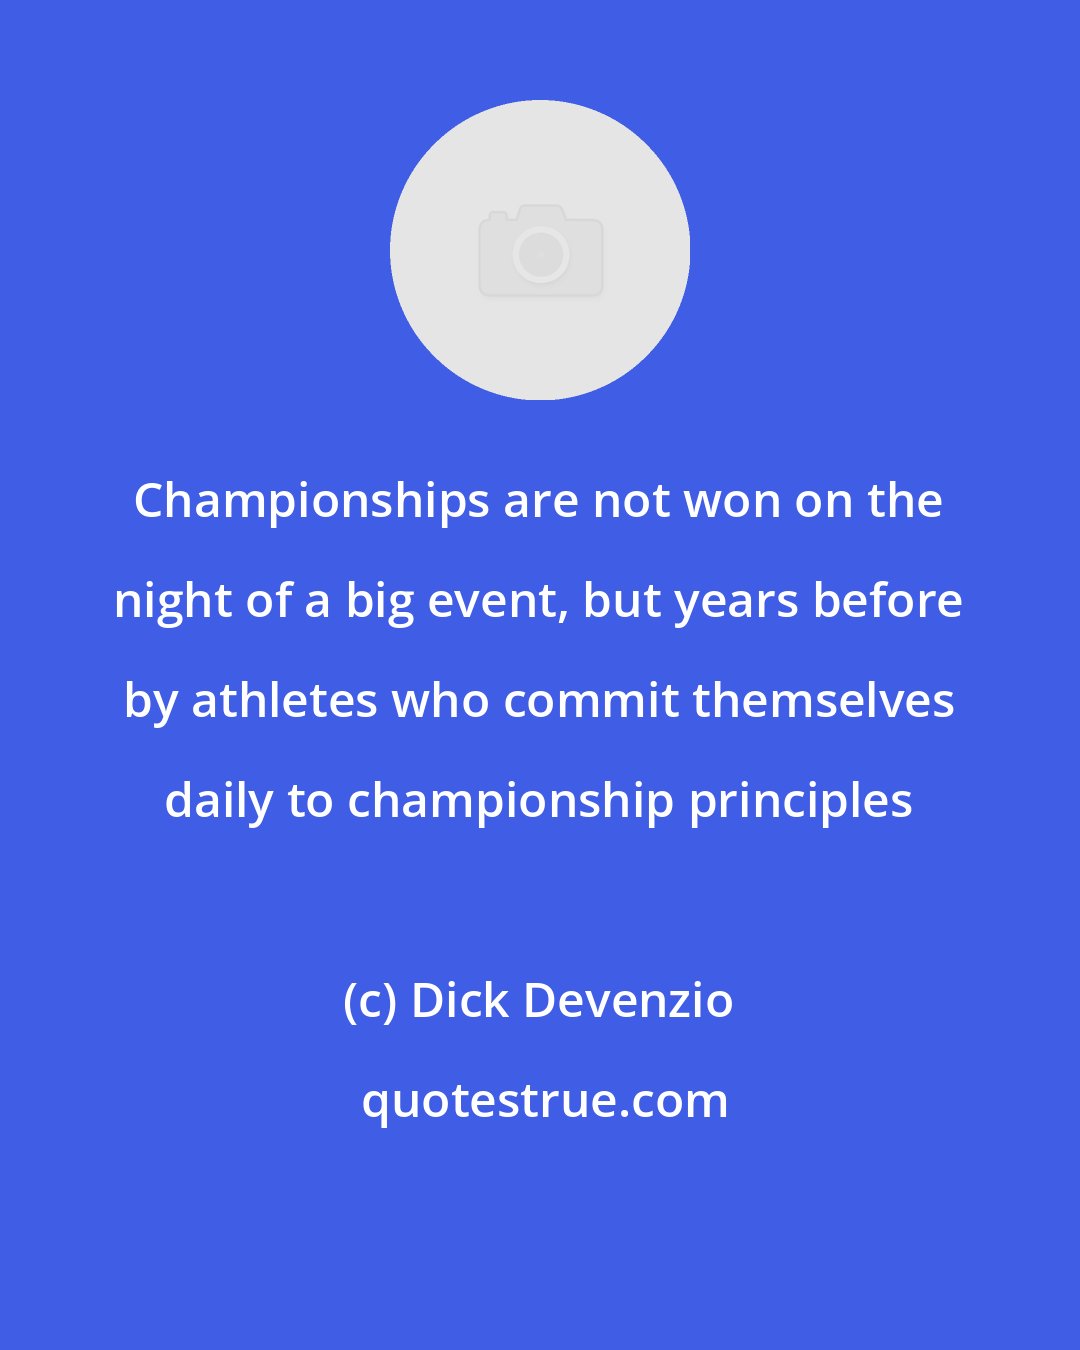 Dick Devenzio: Championships are not won on the night of a big event, but years before by athletes who commit themselves daily to championship principles